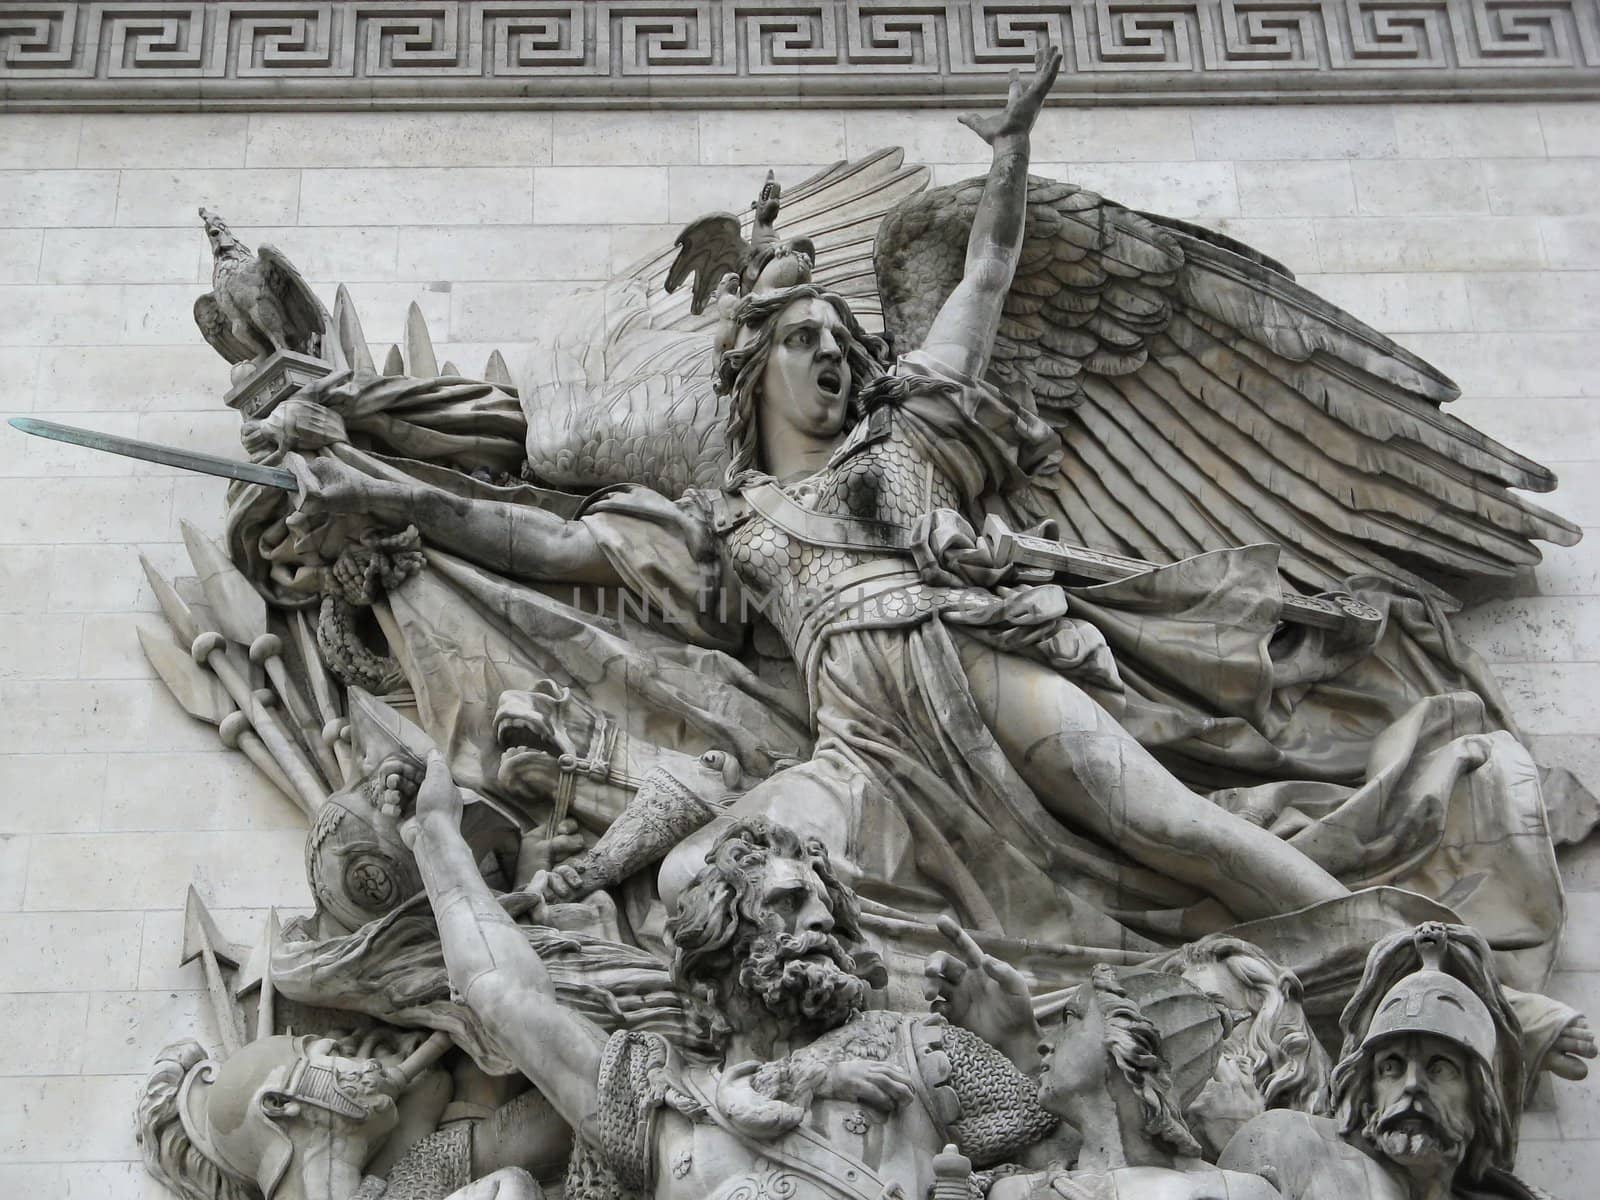 close-up of a group statues of the french Triumph Arch in Paris